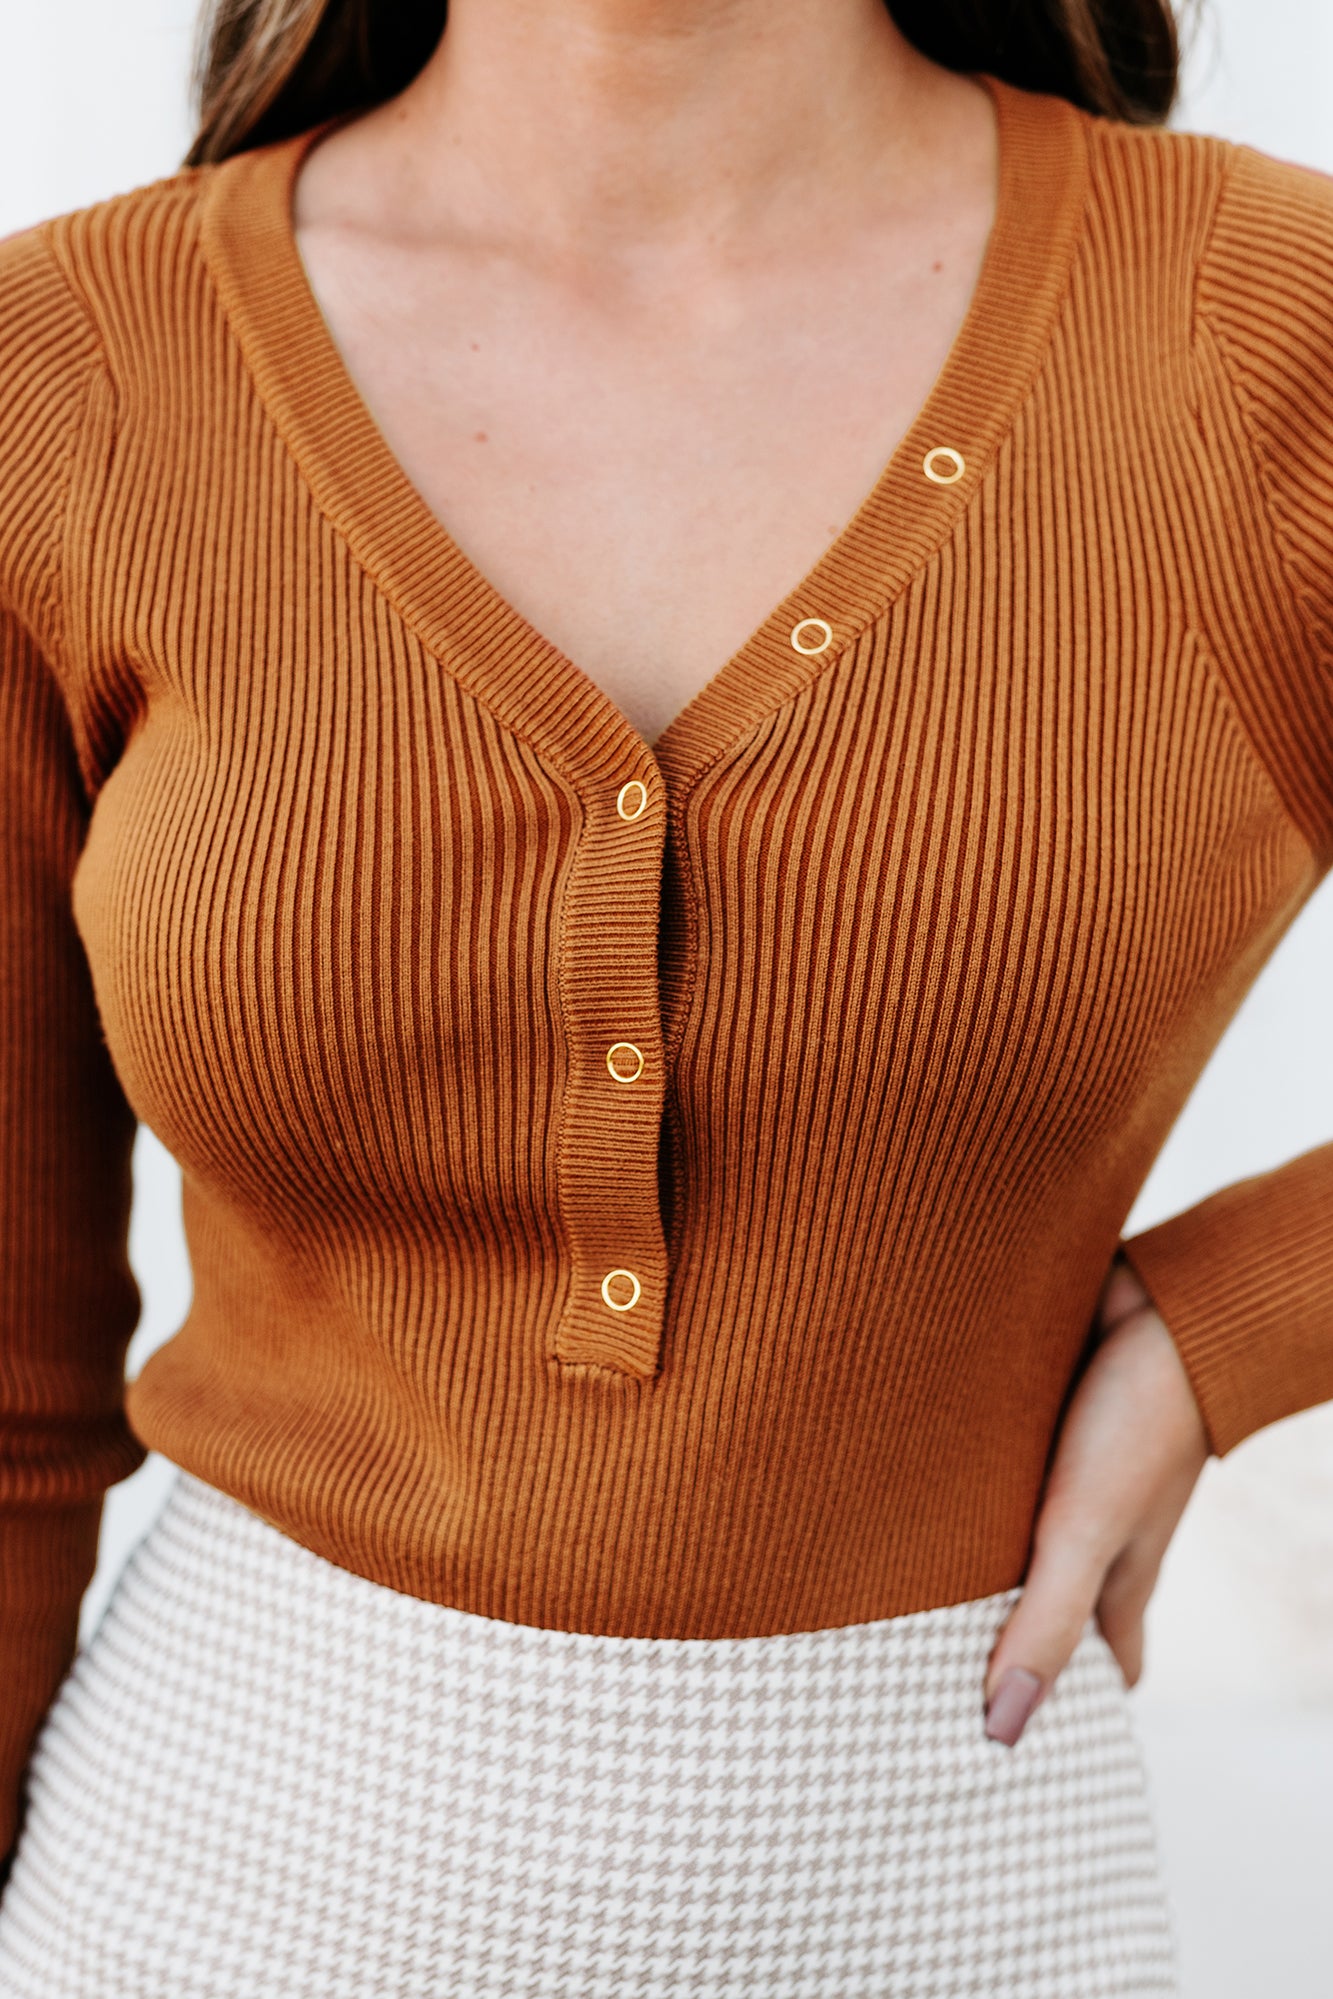 Stay Or Leave Ribbed Button-Down Bodysuit (Rust) - NanaMacs